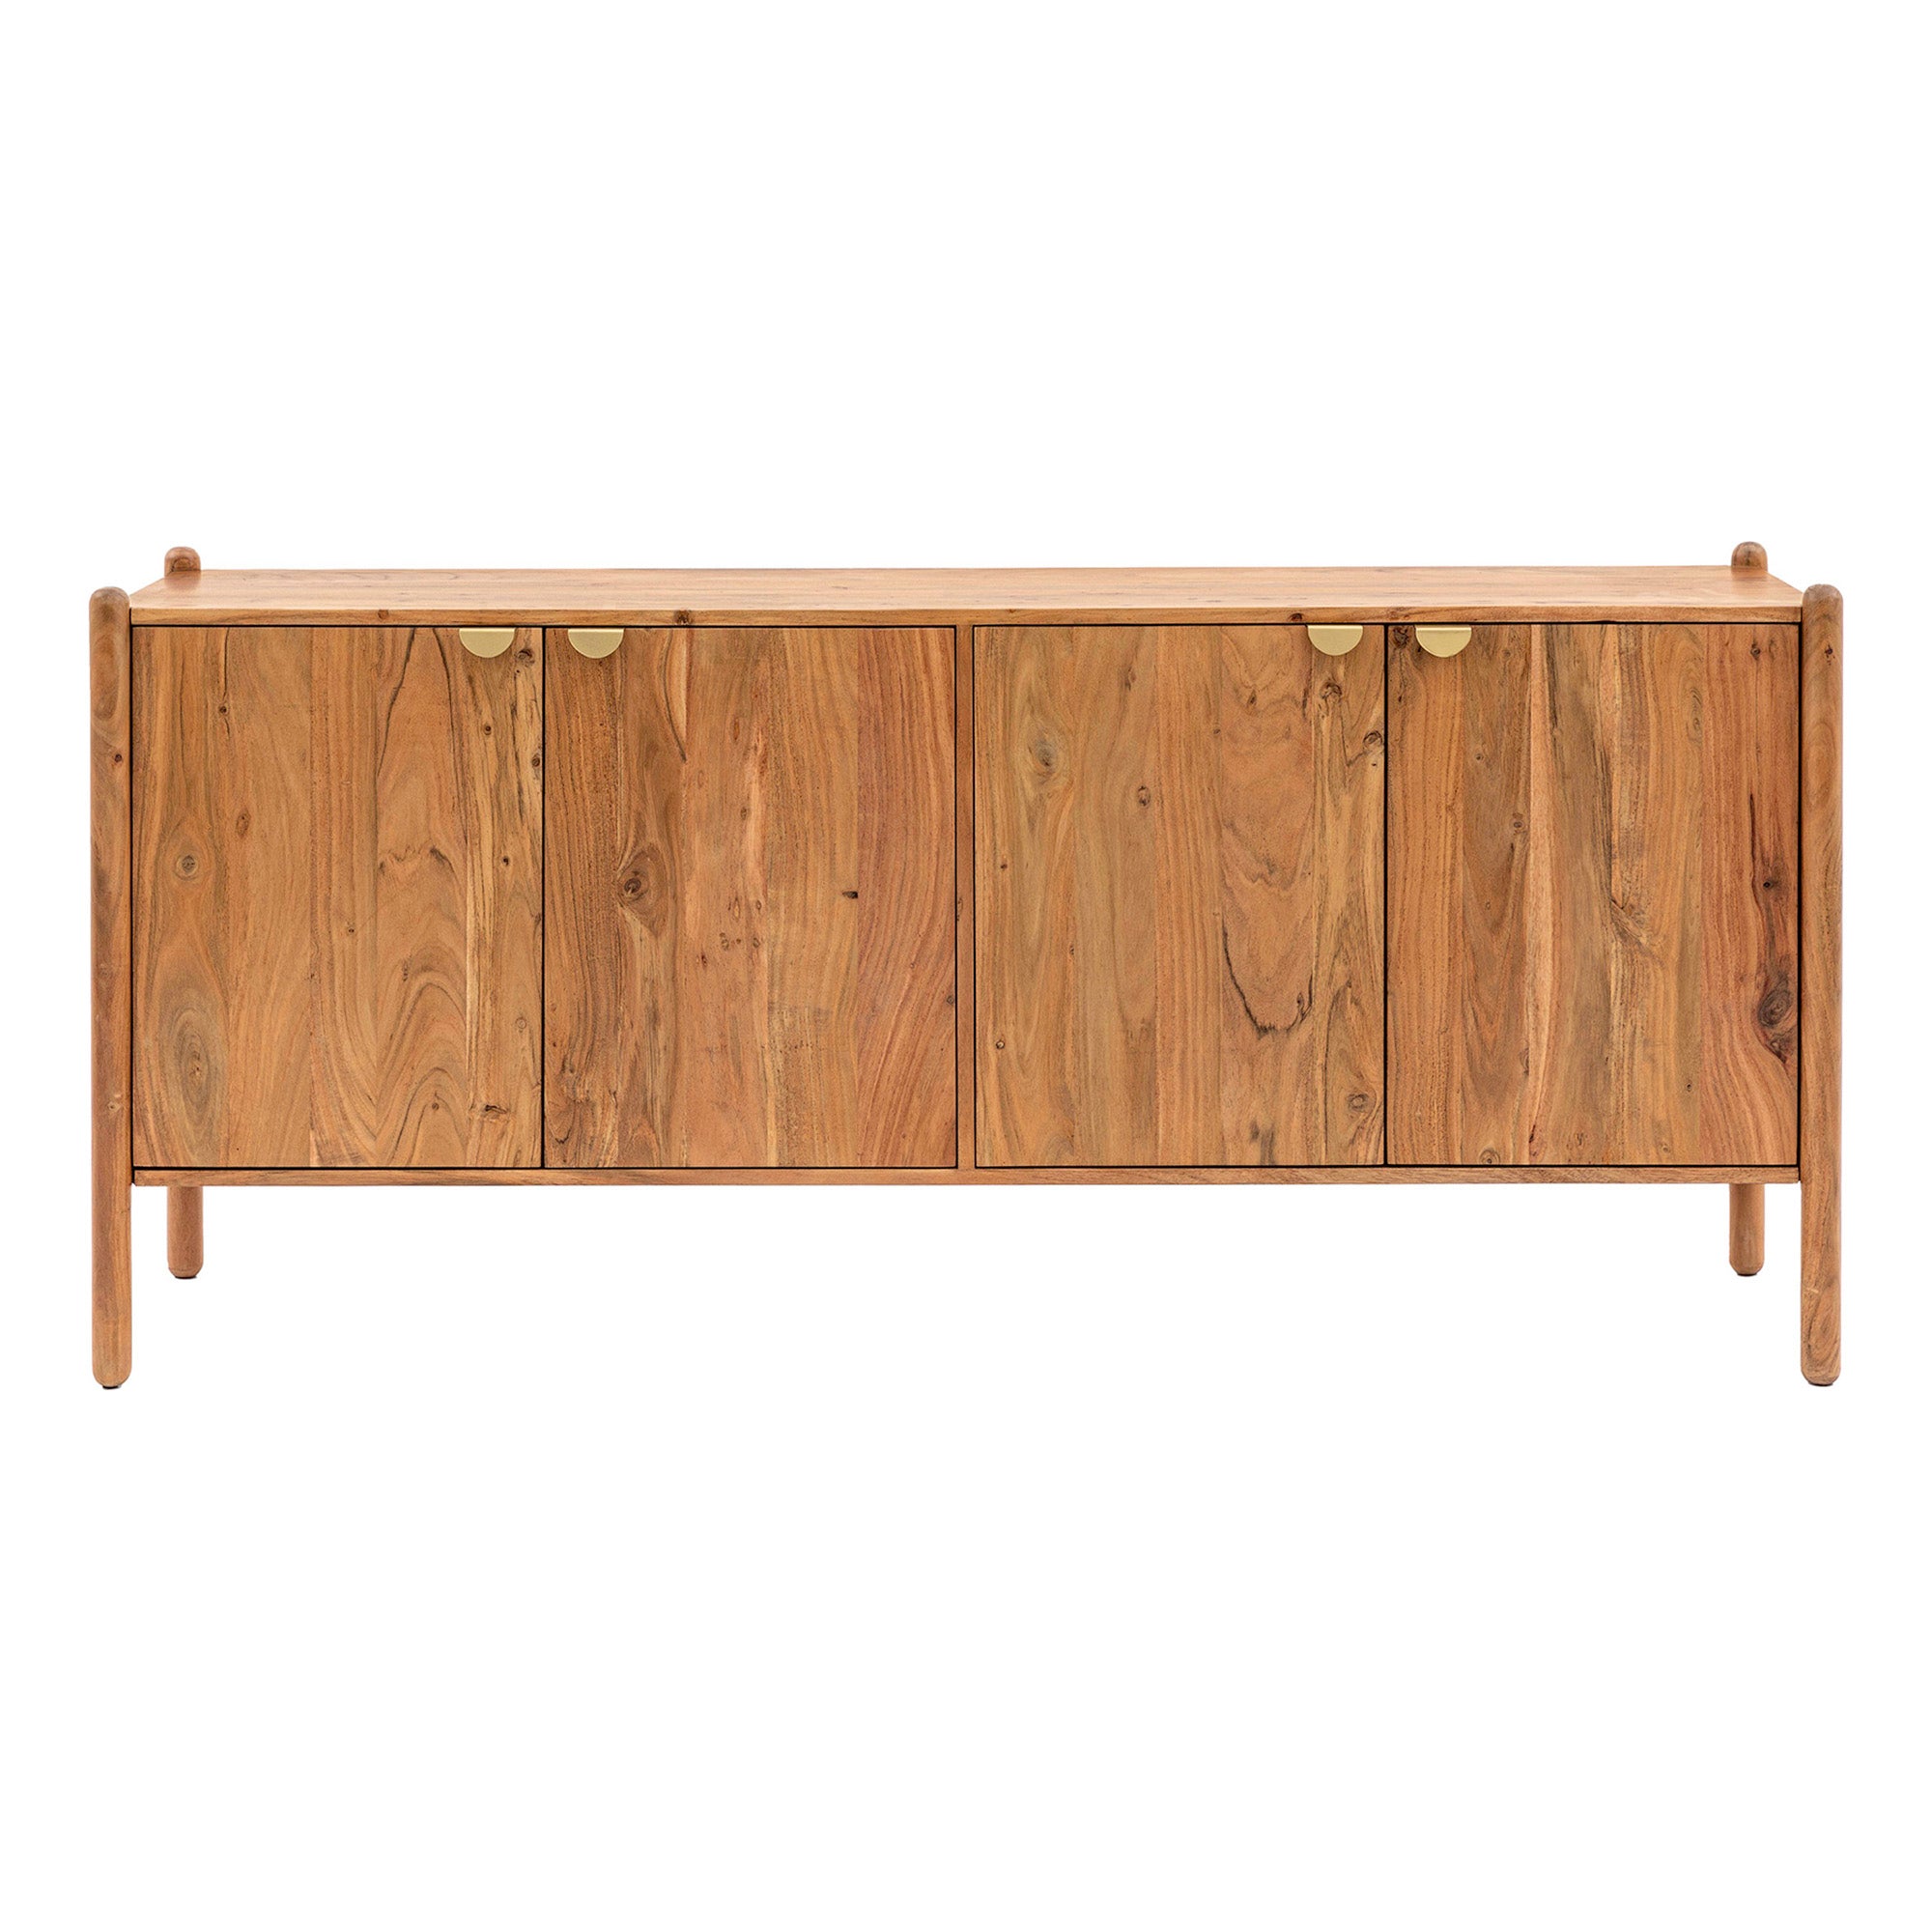 Contemporary Classic Four Foor Sideboard